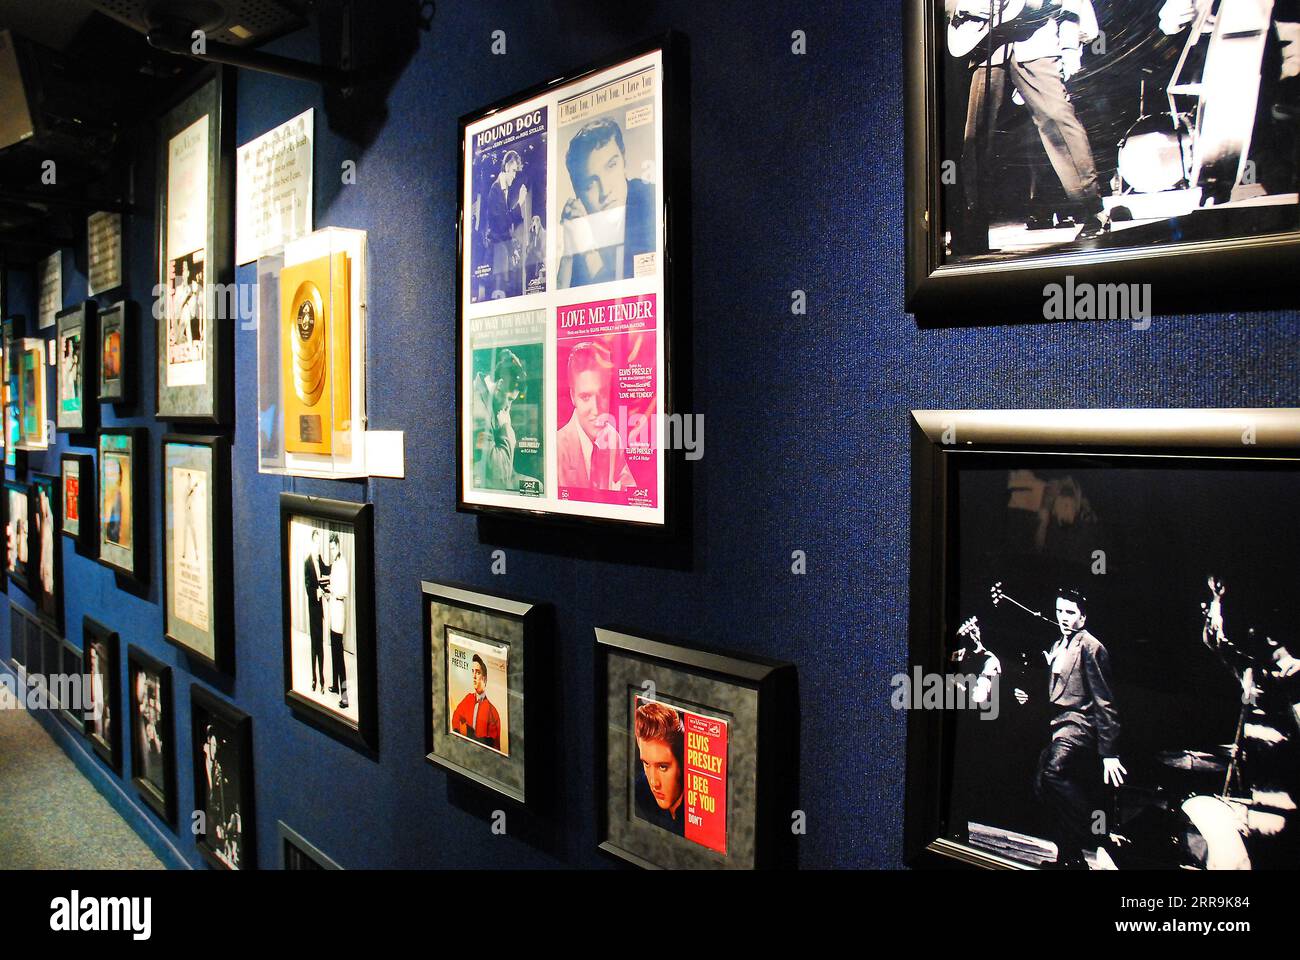 Movie posters and Mementos from the life and career of Elvis Presley on display in Graceland, Memphis, Tennessee Stock Photo